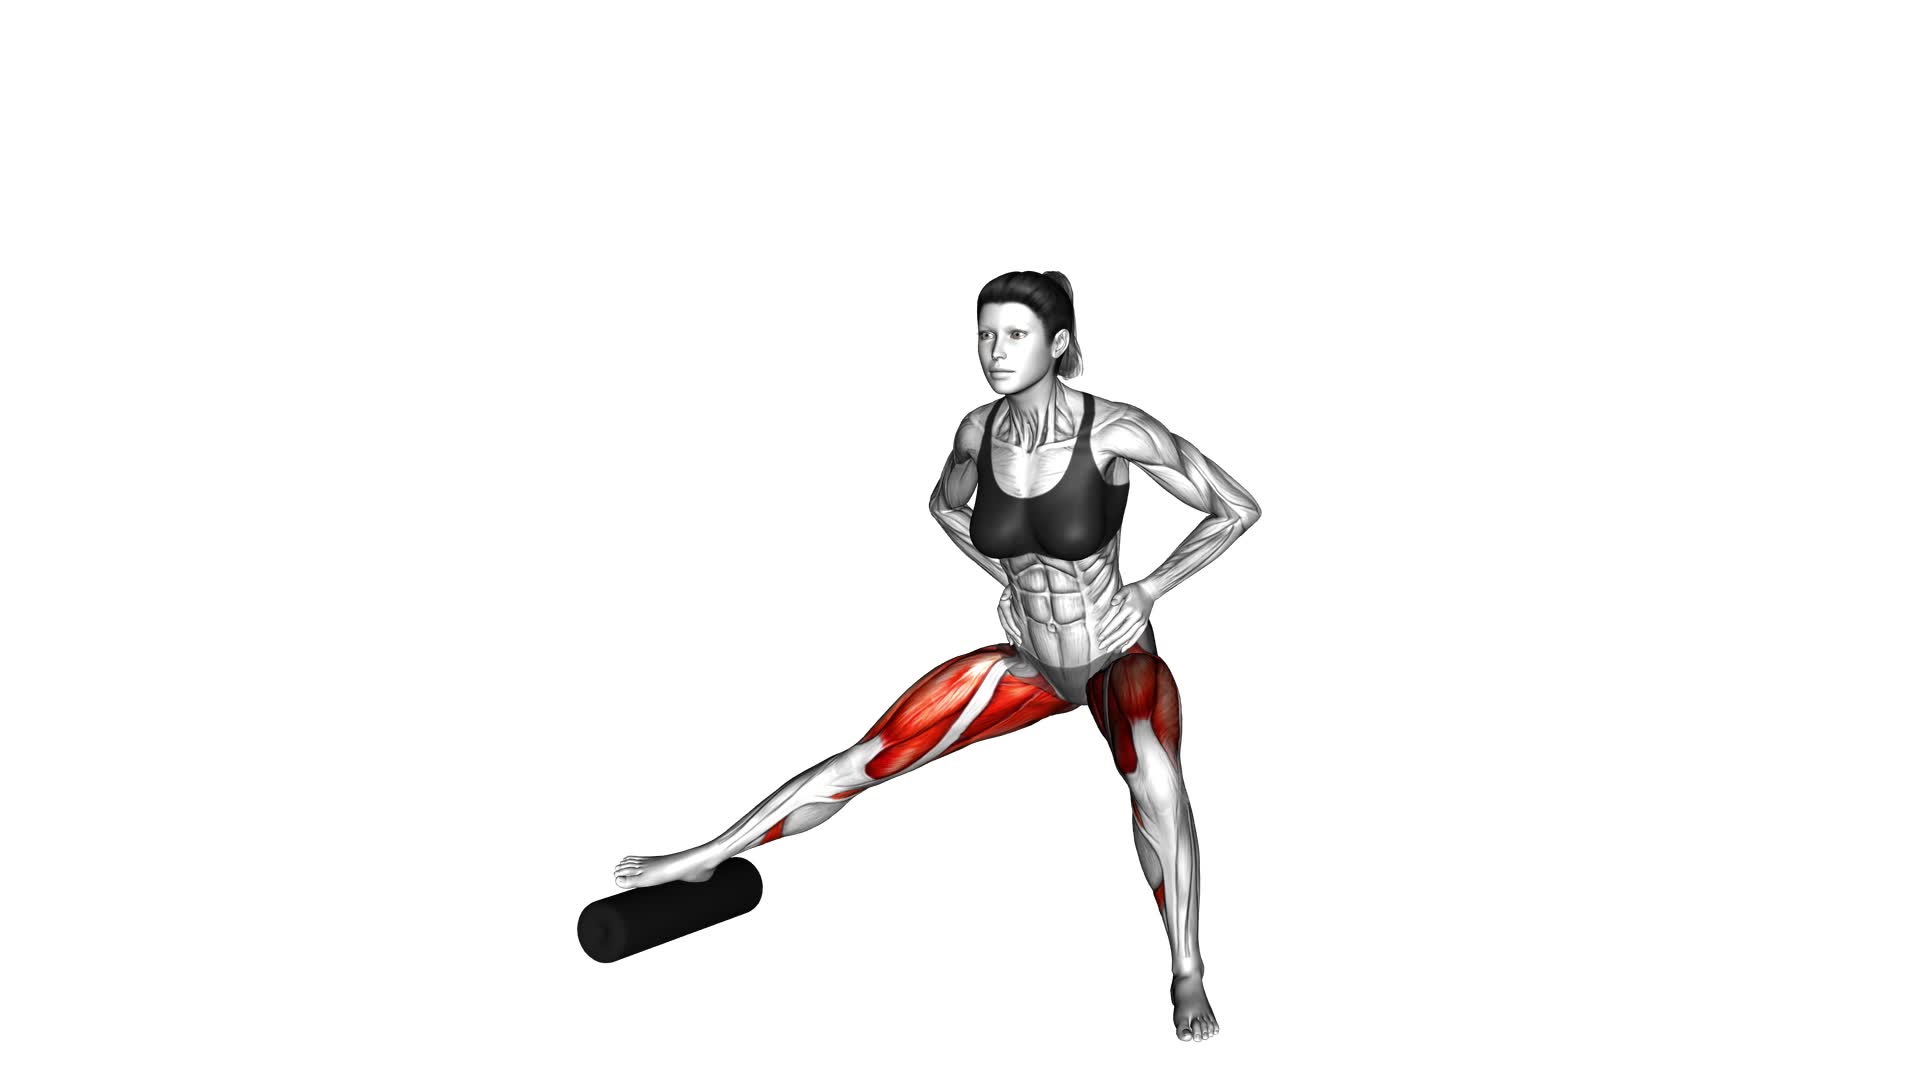 Split Lateral Squat With Roll (Female) - Video Exercise Guide & Tips